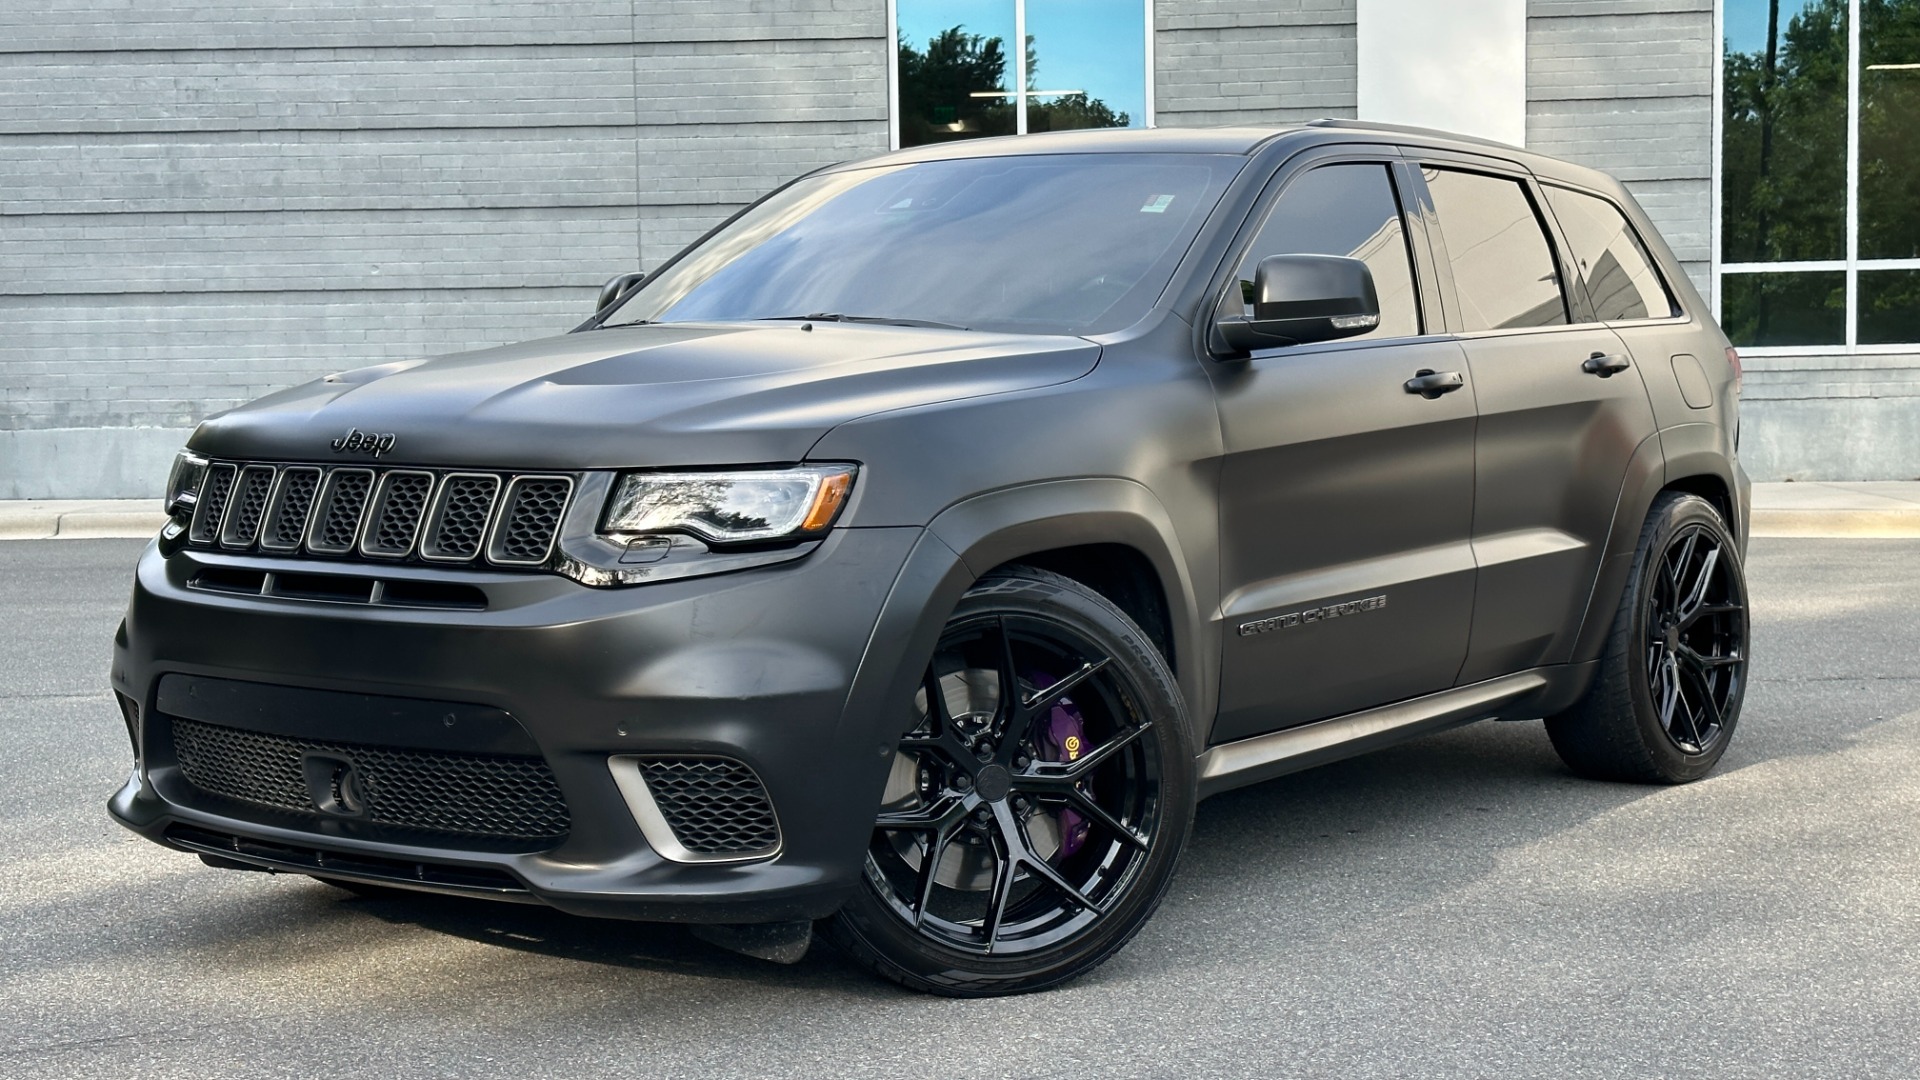 Used 2021 Jeep Grand Cherokee TRACKHAWK / SUPERCHARGED / STARLIGHT HEADLINER / VOSSEN WHEELS for sale $90,495 at Formula Imports in Charlotte NC 28227 1